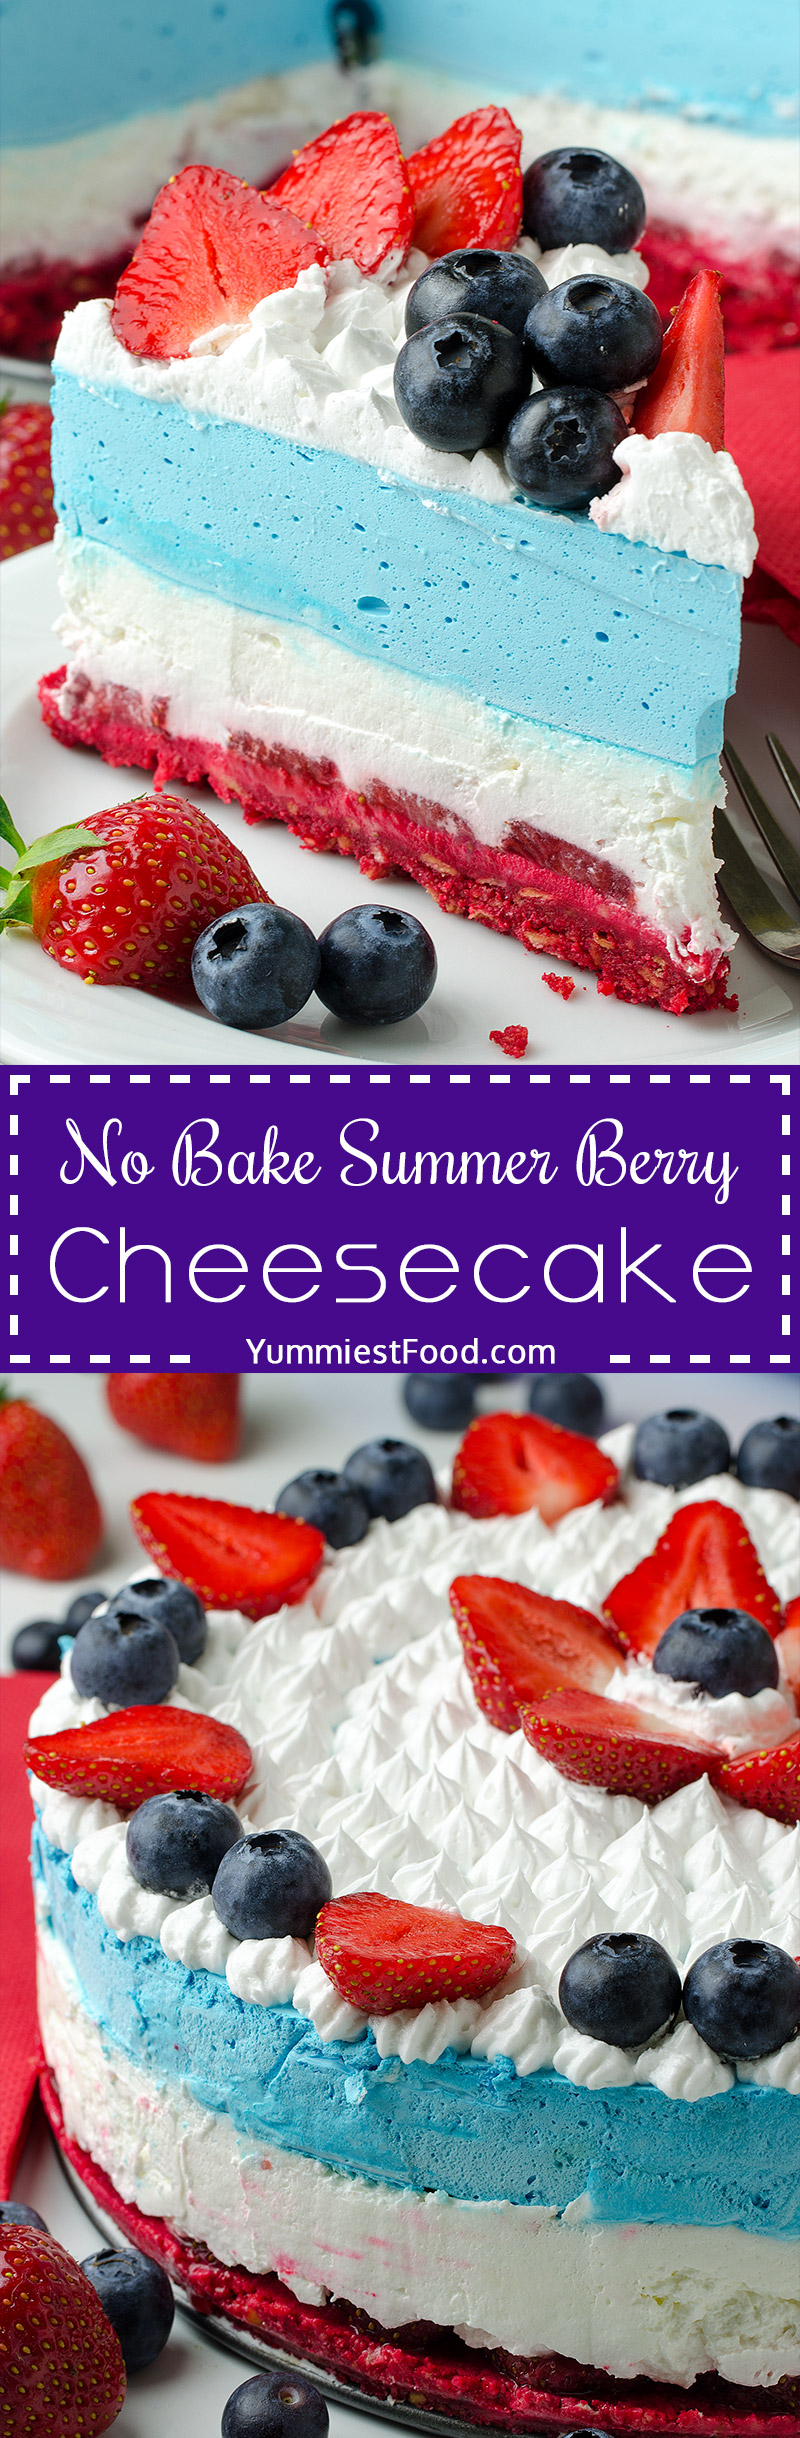 NO BAKE SUMMER BERRY CHEESECAKE - The red, white and blue cake layers make it an awesome 4th of July cake. It's simple, light and full of fresh summer berries.